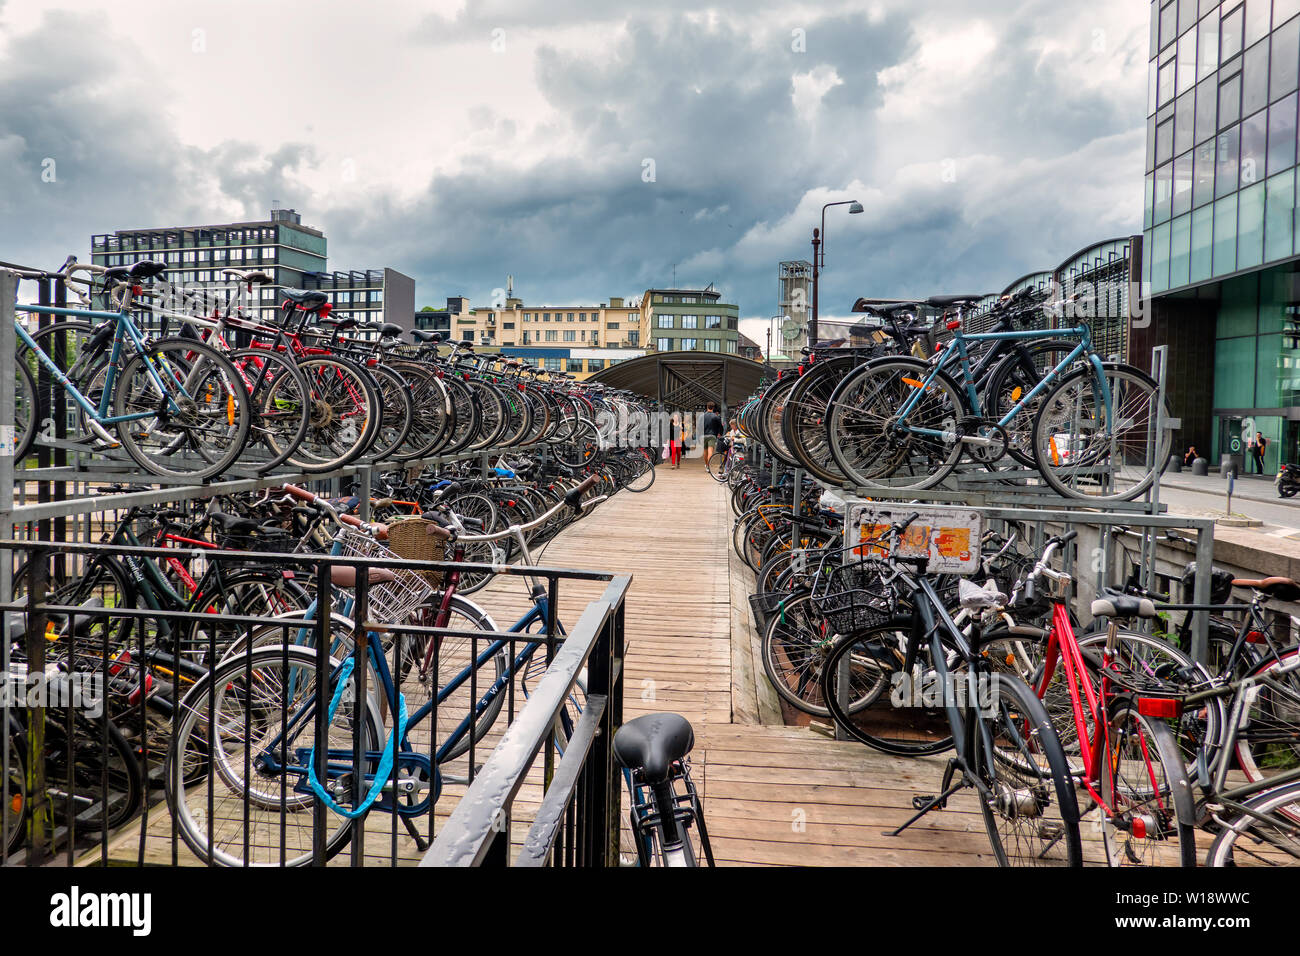 Bycicle parking in Aarhus city center, Denmark Stock Photo